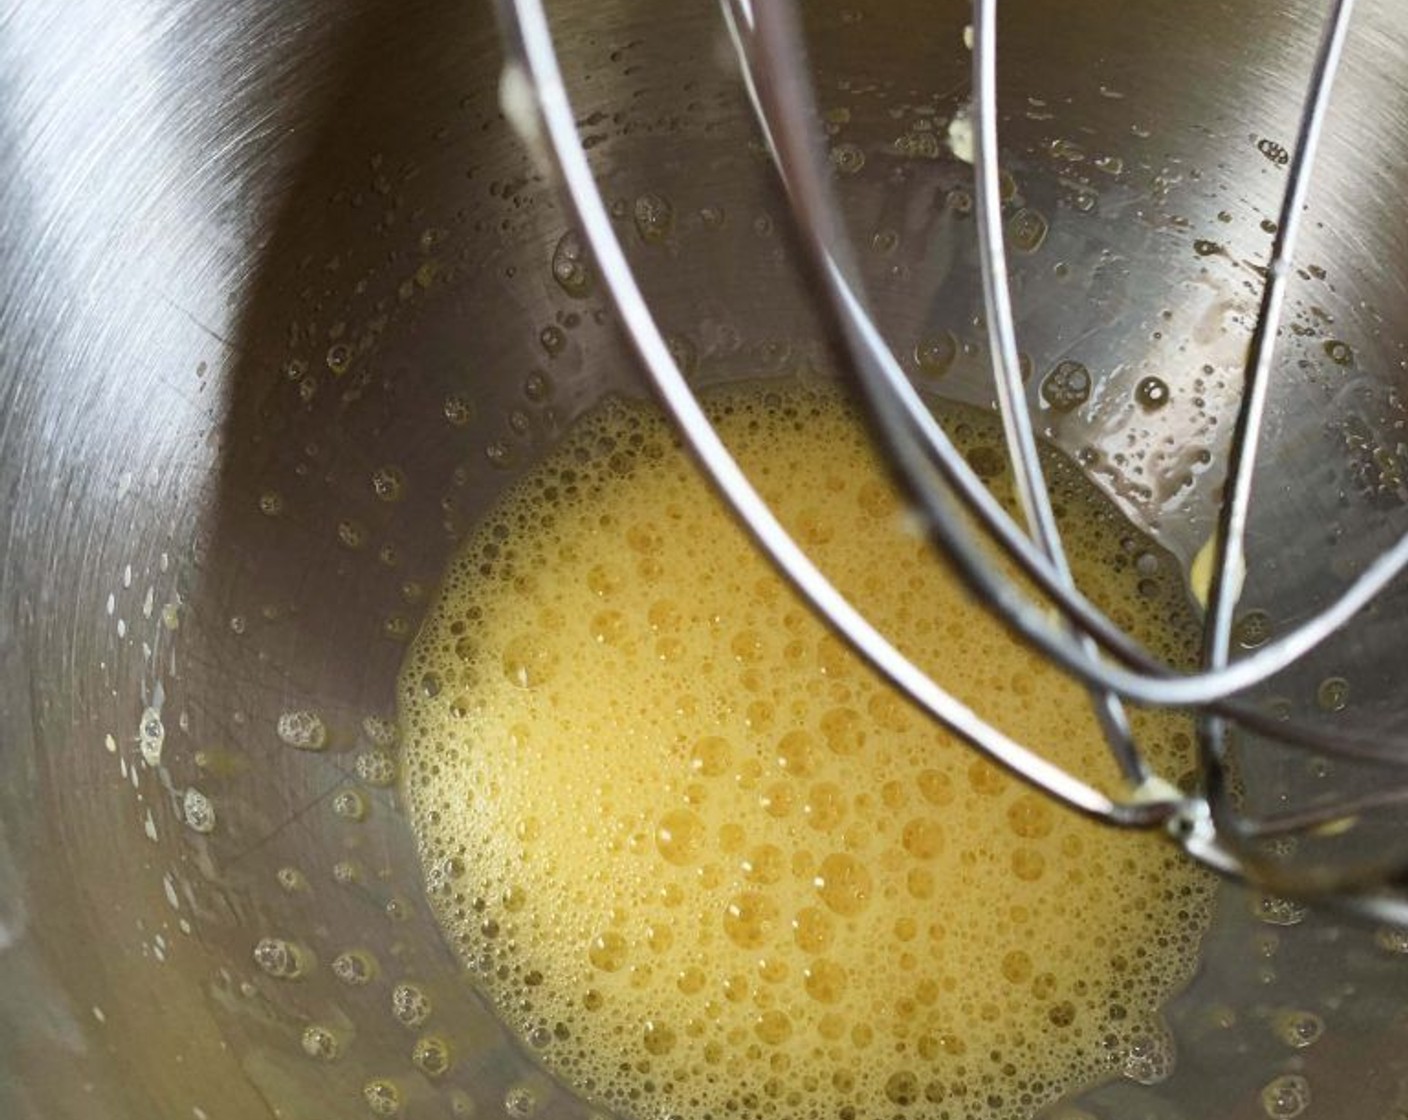 step 3 In a bowl of your electric mixer, whisk the Eggs (2) with a pinch of Salt (1 pinch) until light in color.